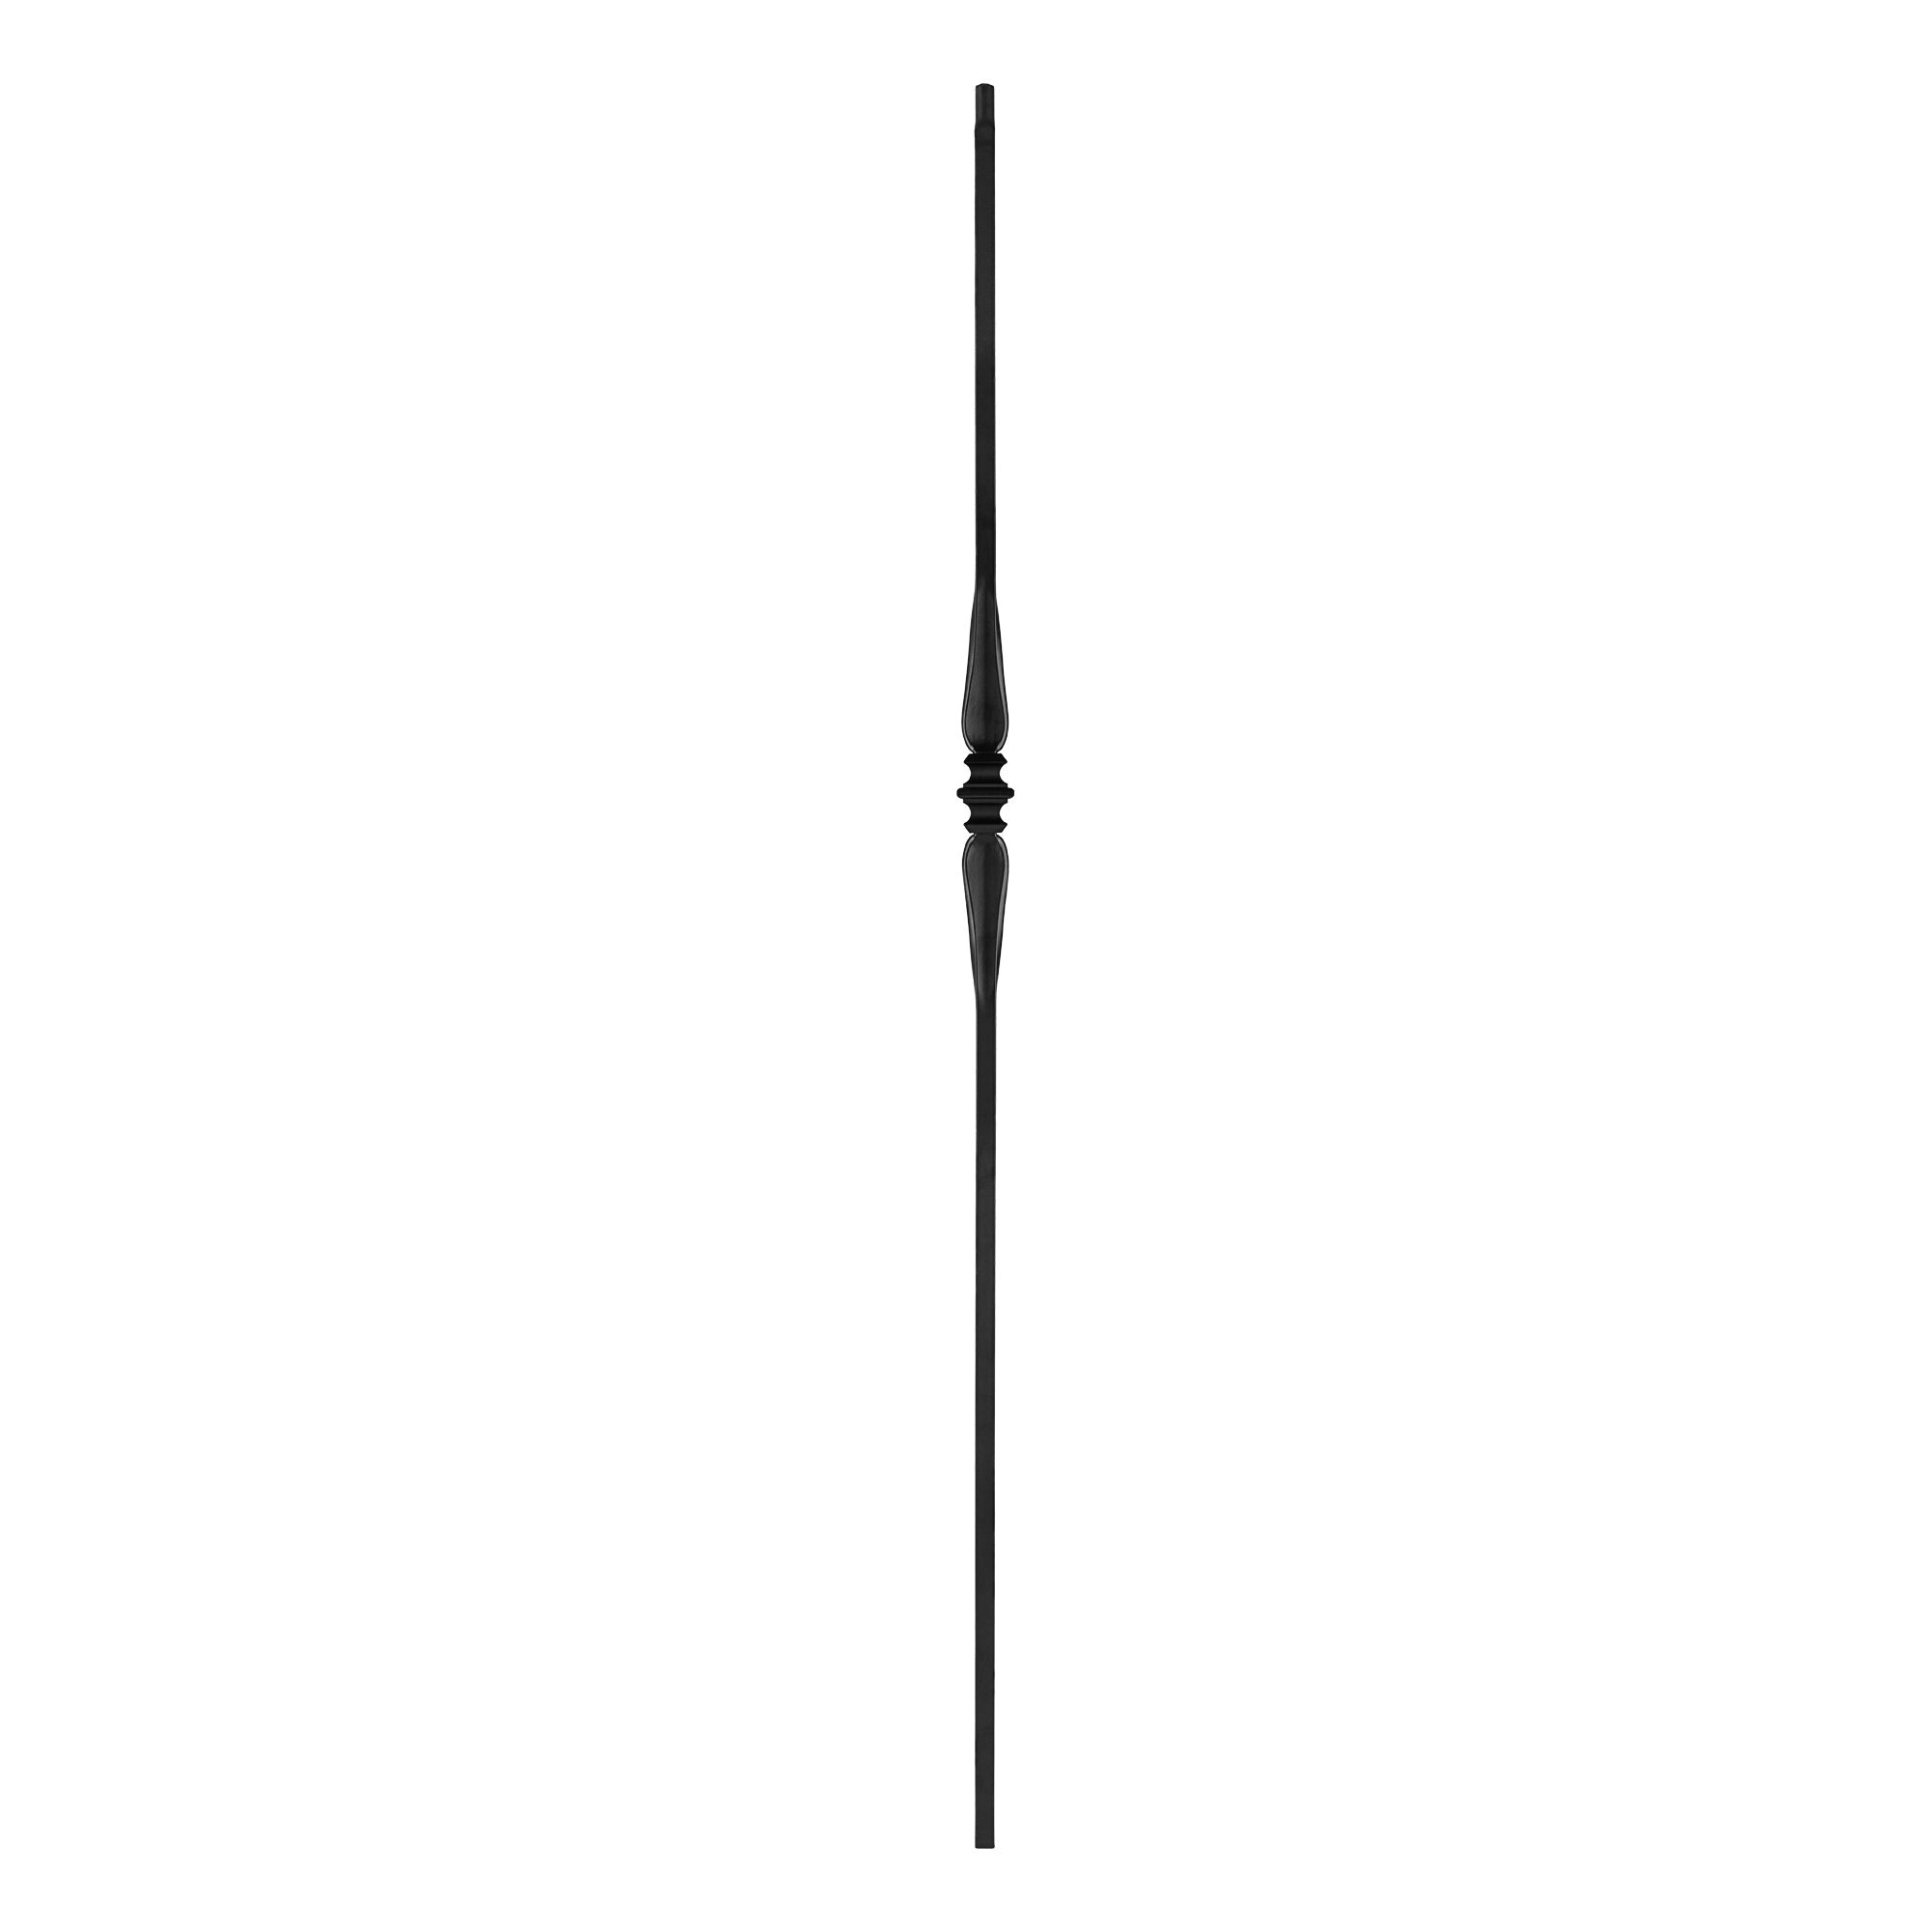 SQI1CS Single Collar and Spoon Stair Baluster, 44 in H, 1/2 in W, Square, Steel, Black